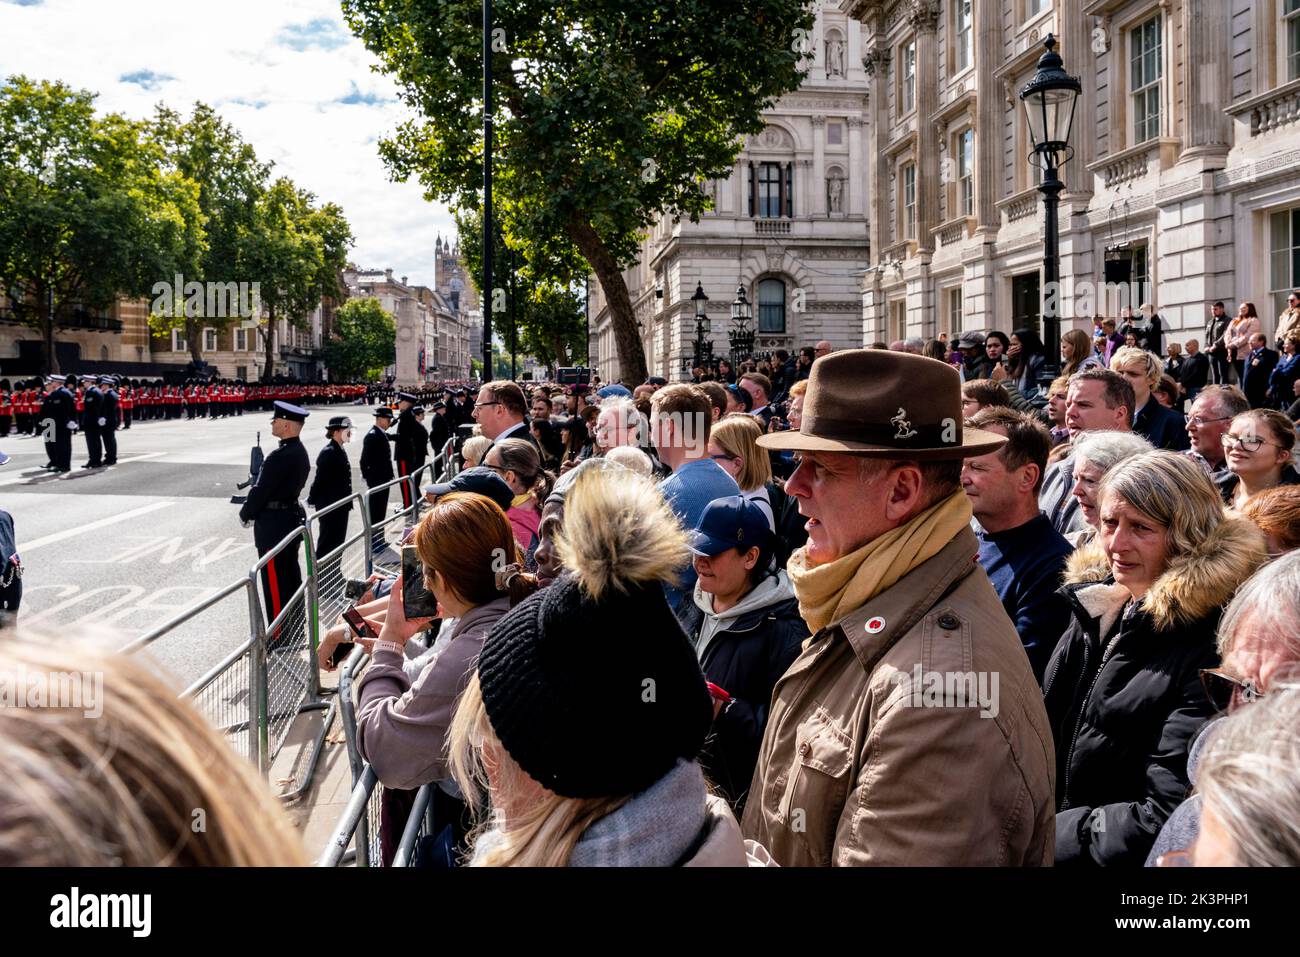 Crowds Of People Come To London To Watch The Queen's Funeral, Whitehall, London, UK. Stock Photo